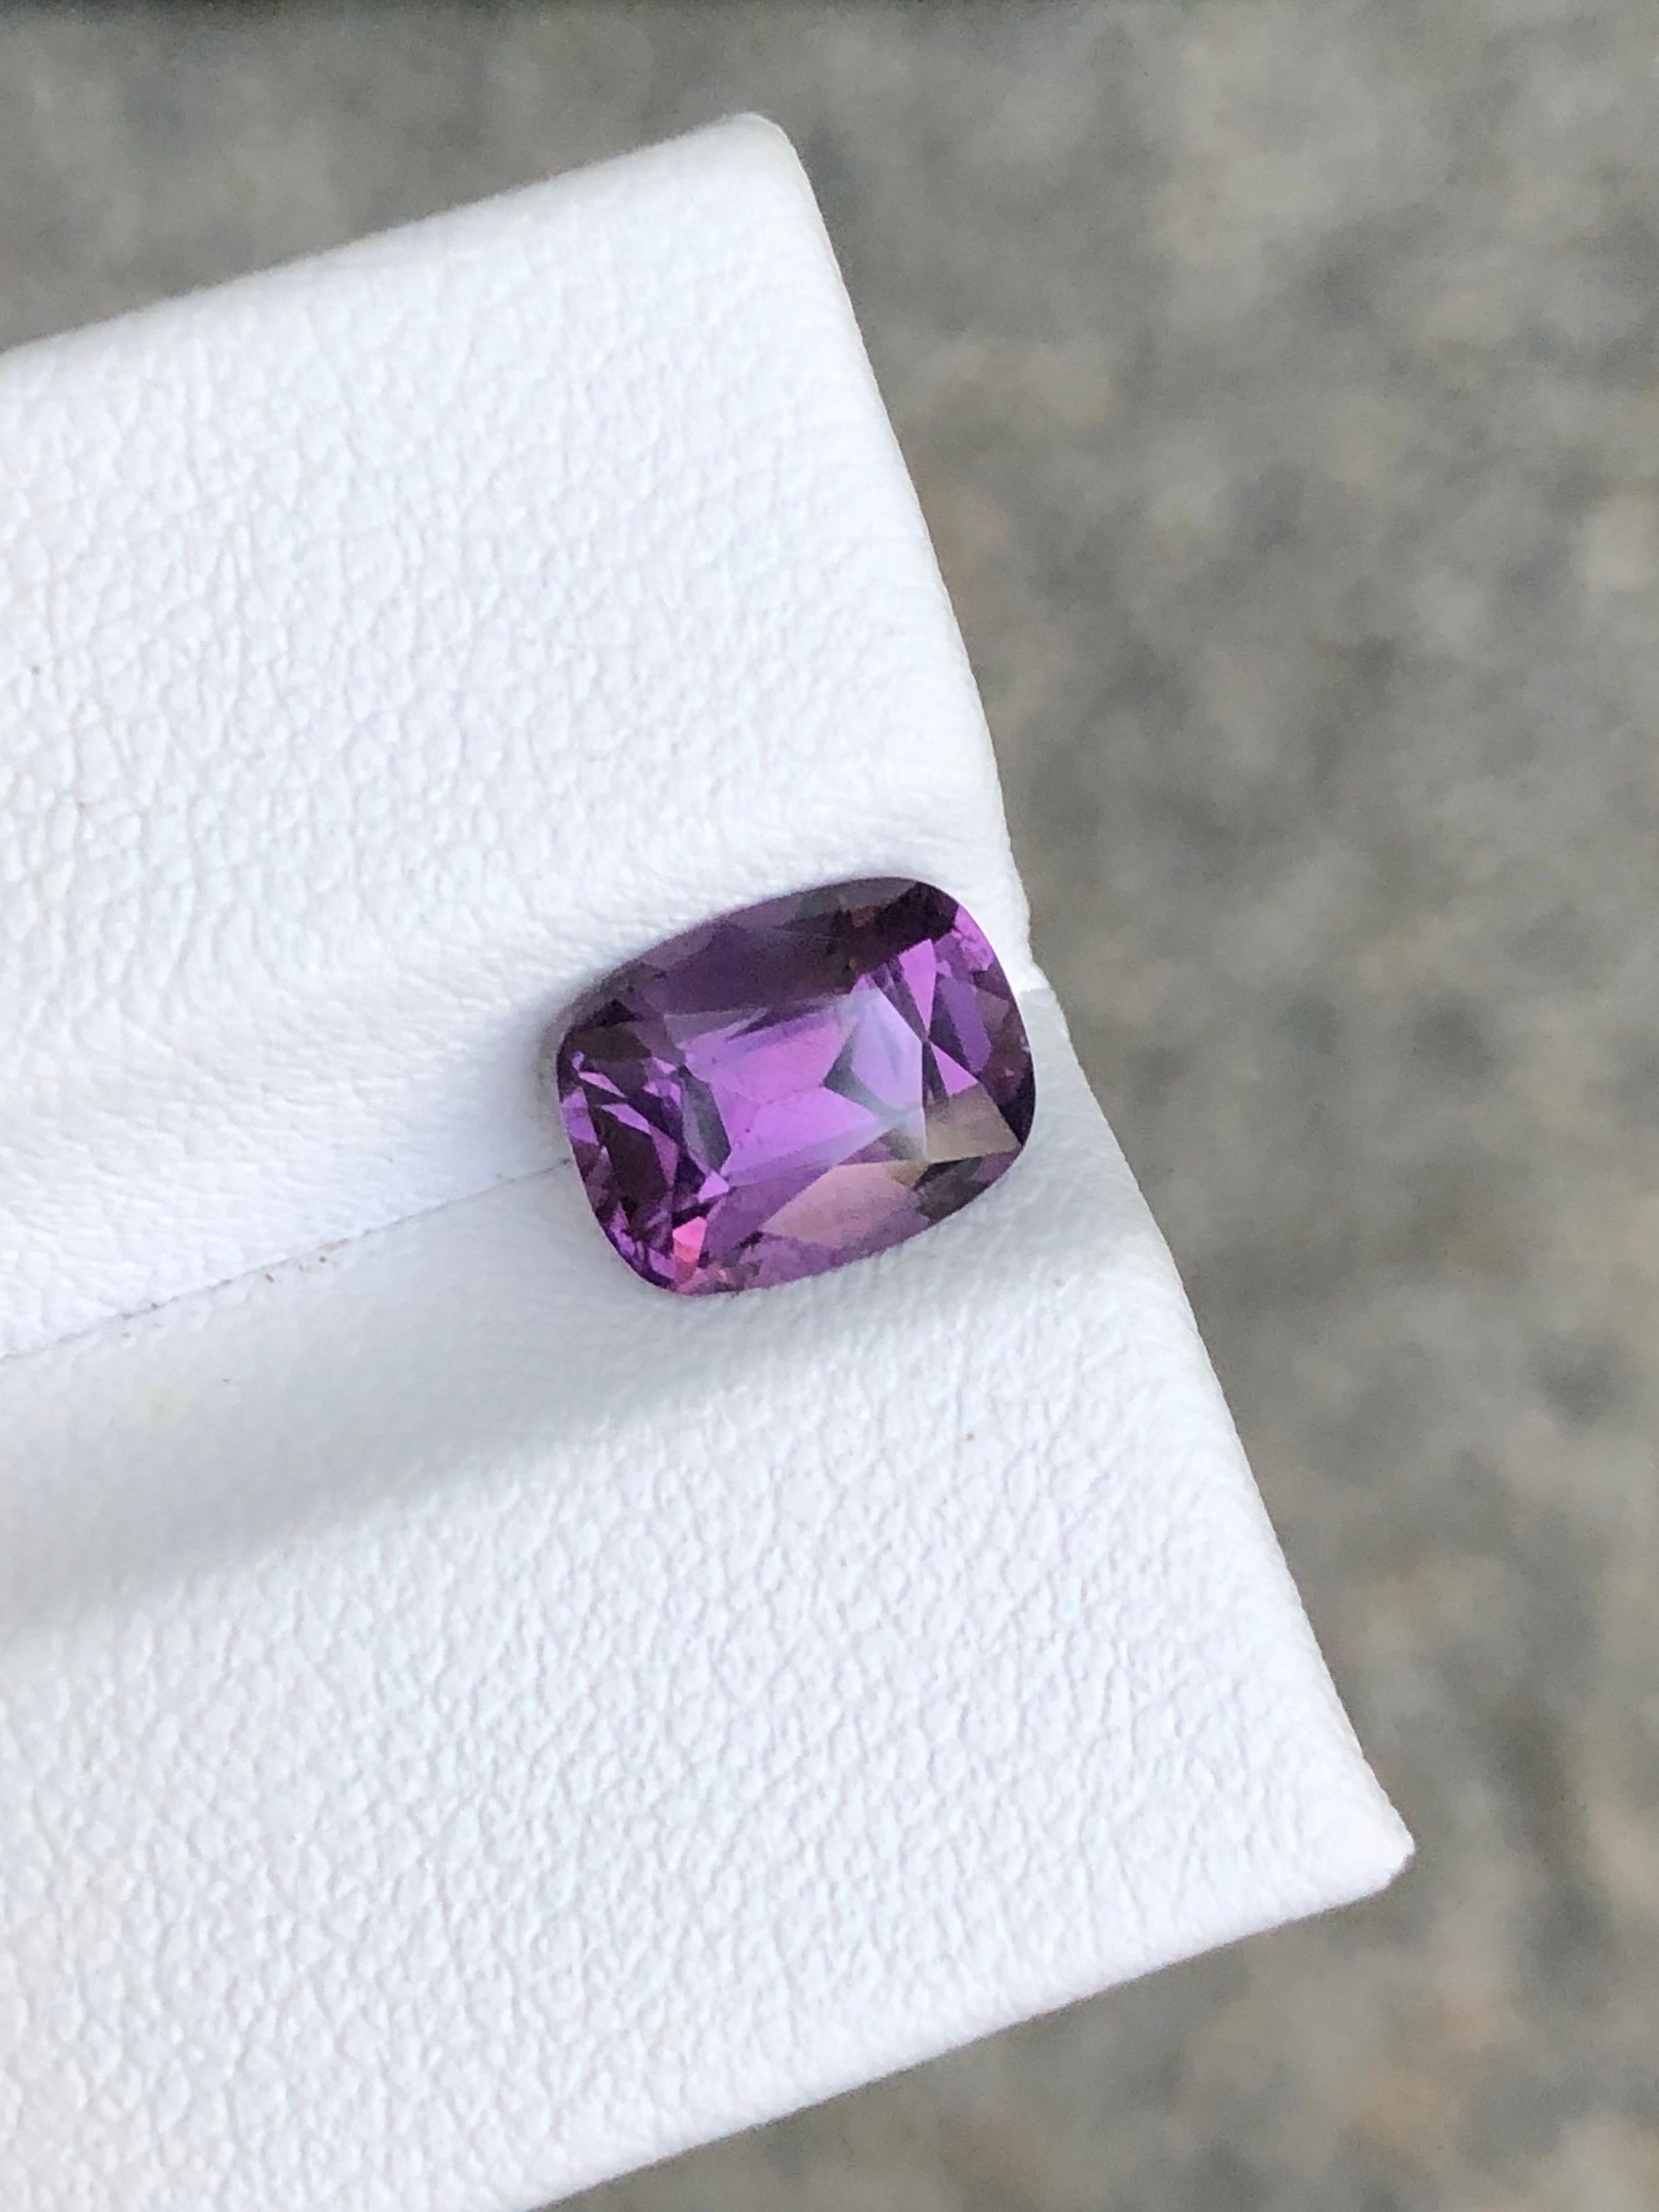 🌟 Introducing our stunning Violet Purple Spinel! 🌟
Elevate your jewelry collection with this mesmerizing 2.25 carat Step Cushion cut Spinel. Radiating elegance and allure, its vibrant violet purple hue is sure to captivate all eyes. With its Eye